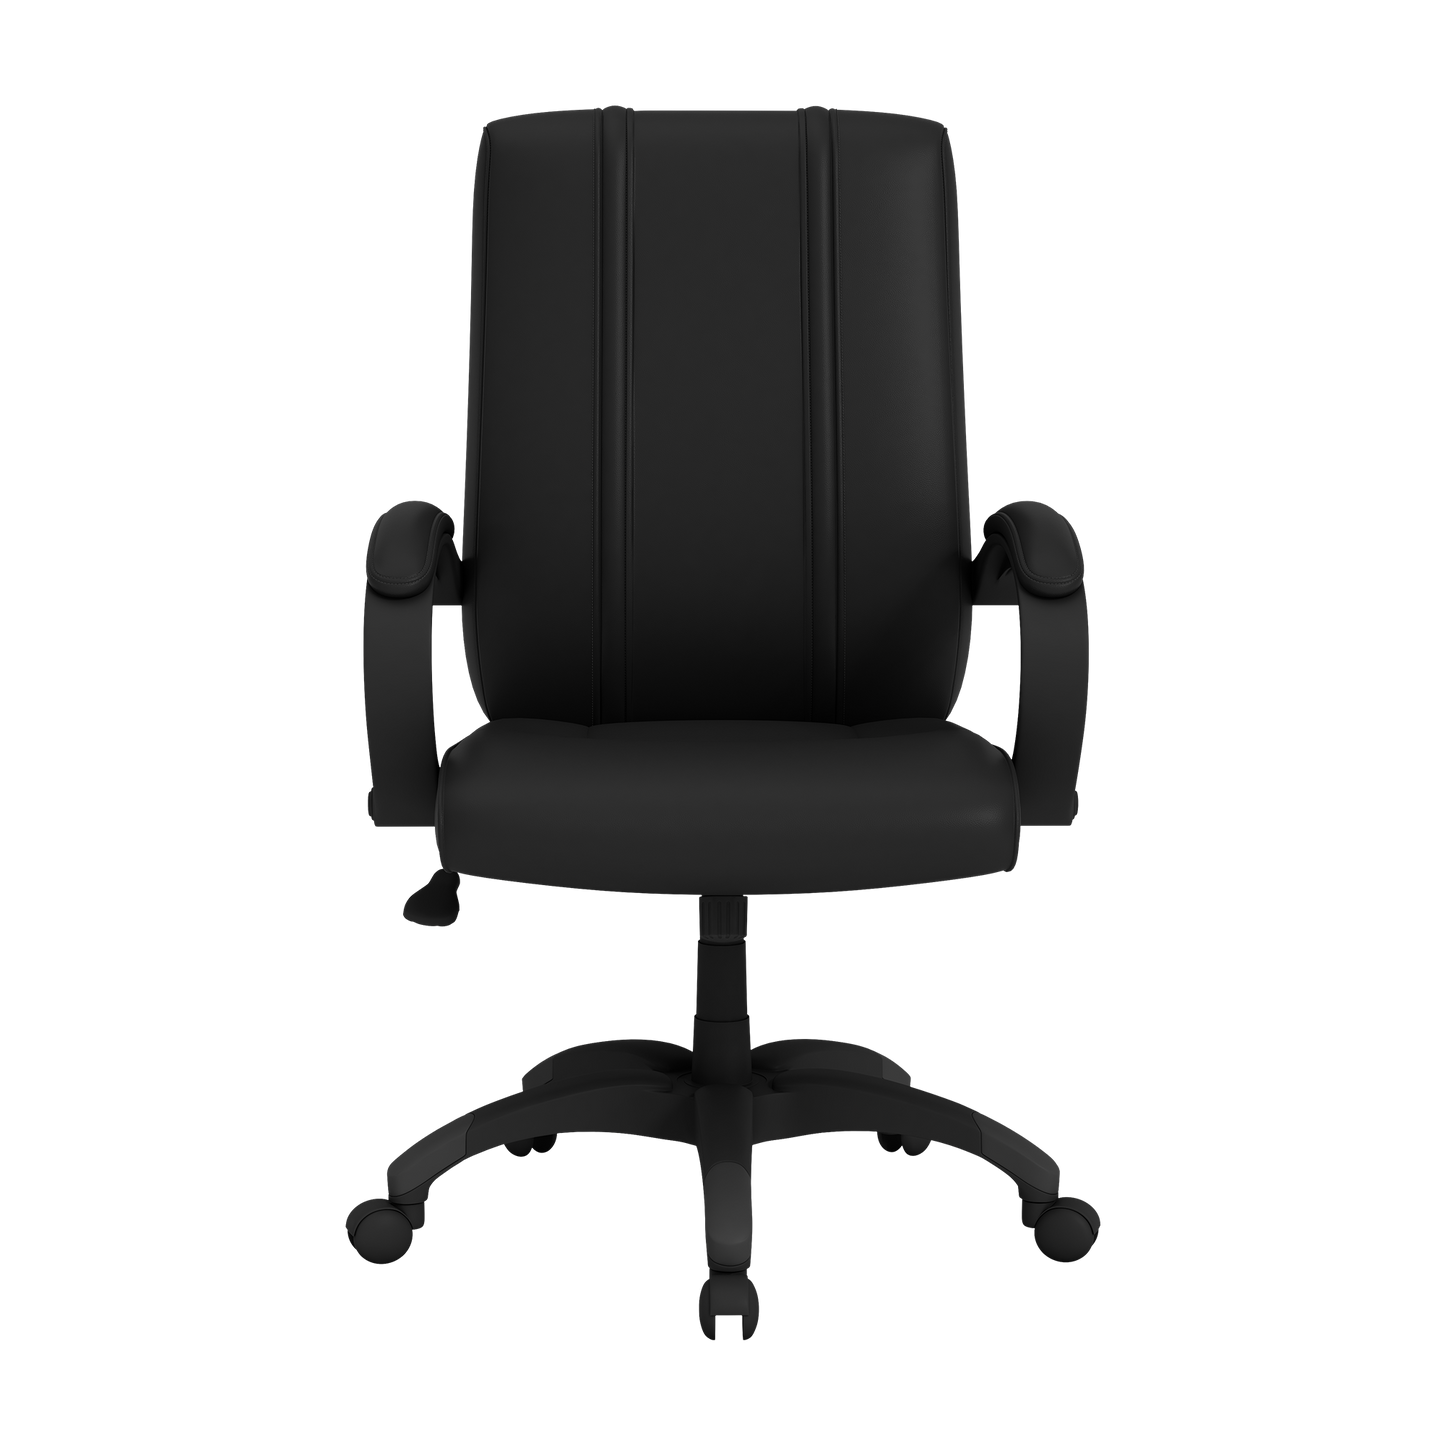 Office Chair 1000 with Pittsburgh Pirates Secondary